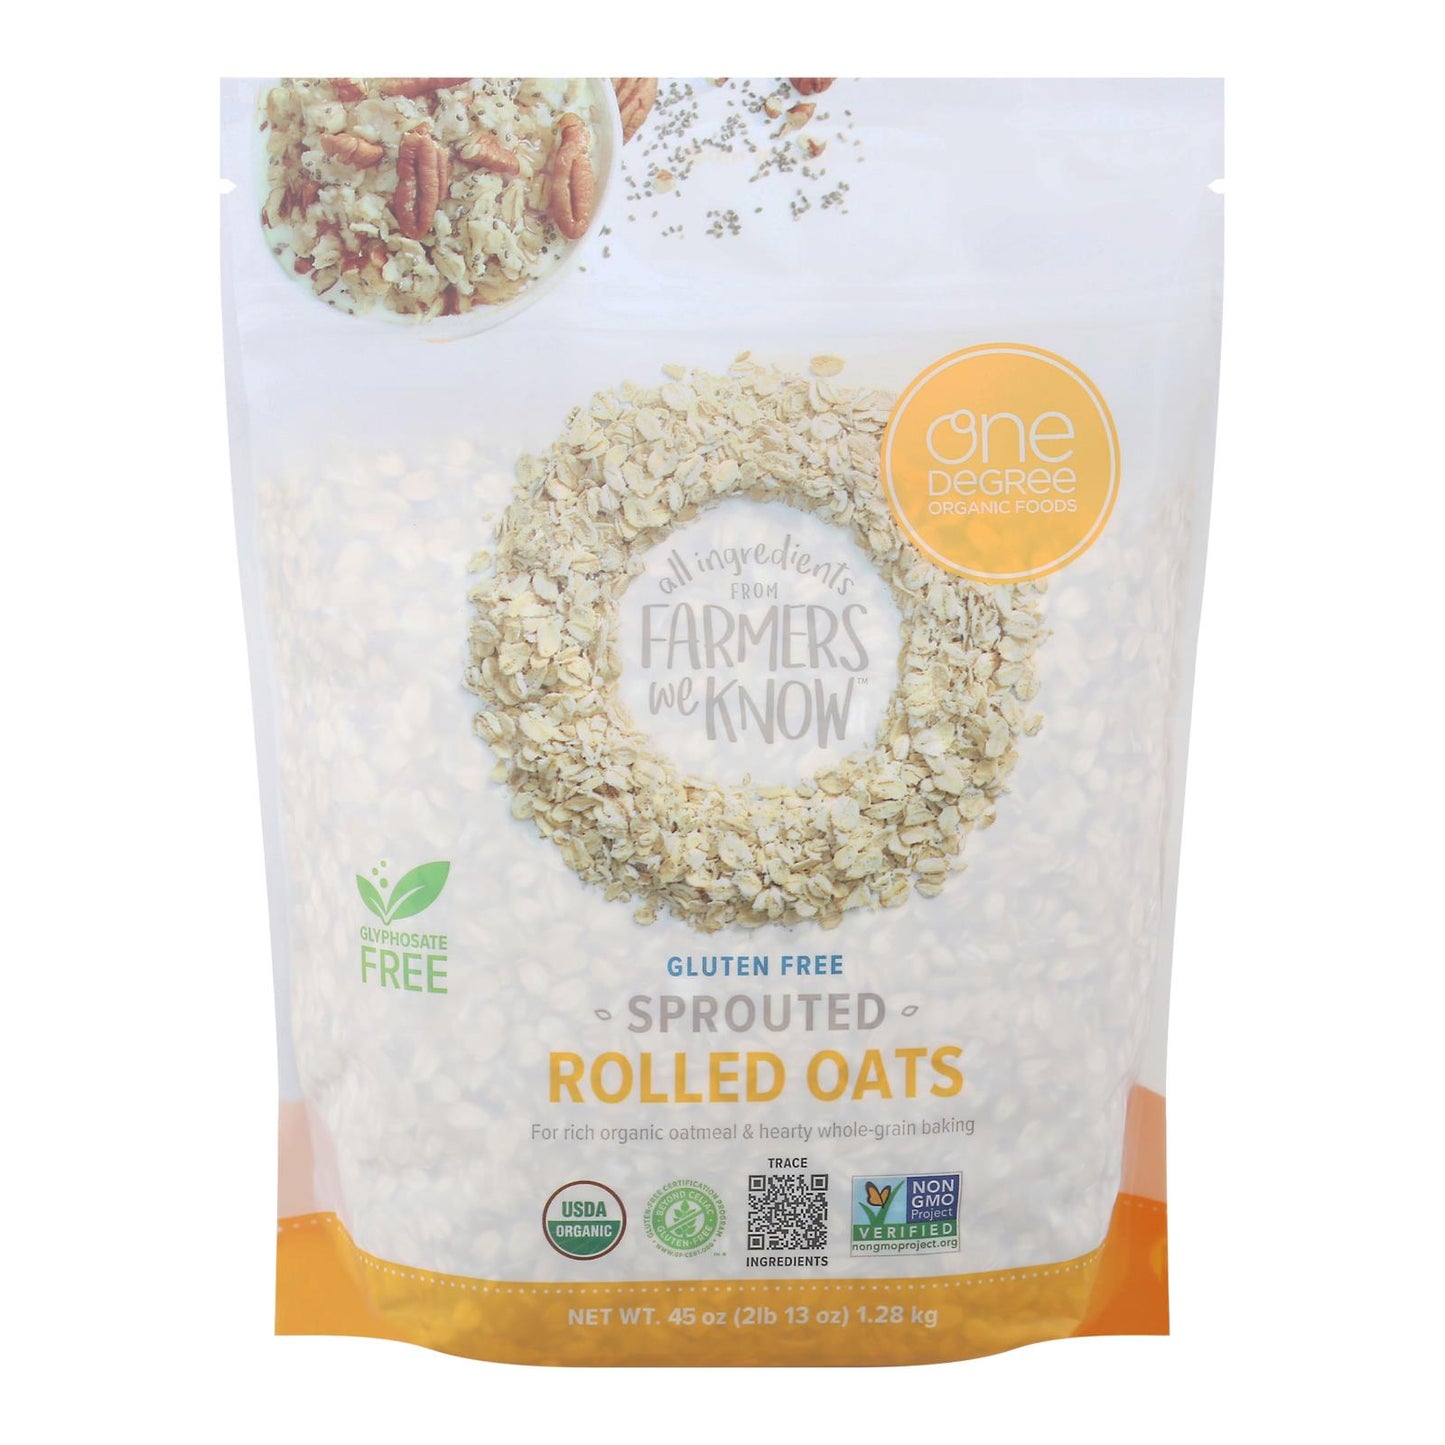 One Degree Organic Foods - Sprtd Oats Rolled - Case Of 4 - 45 Oz